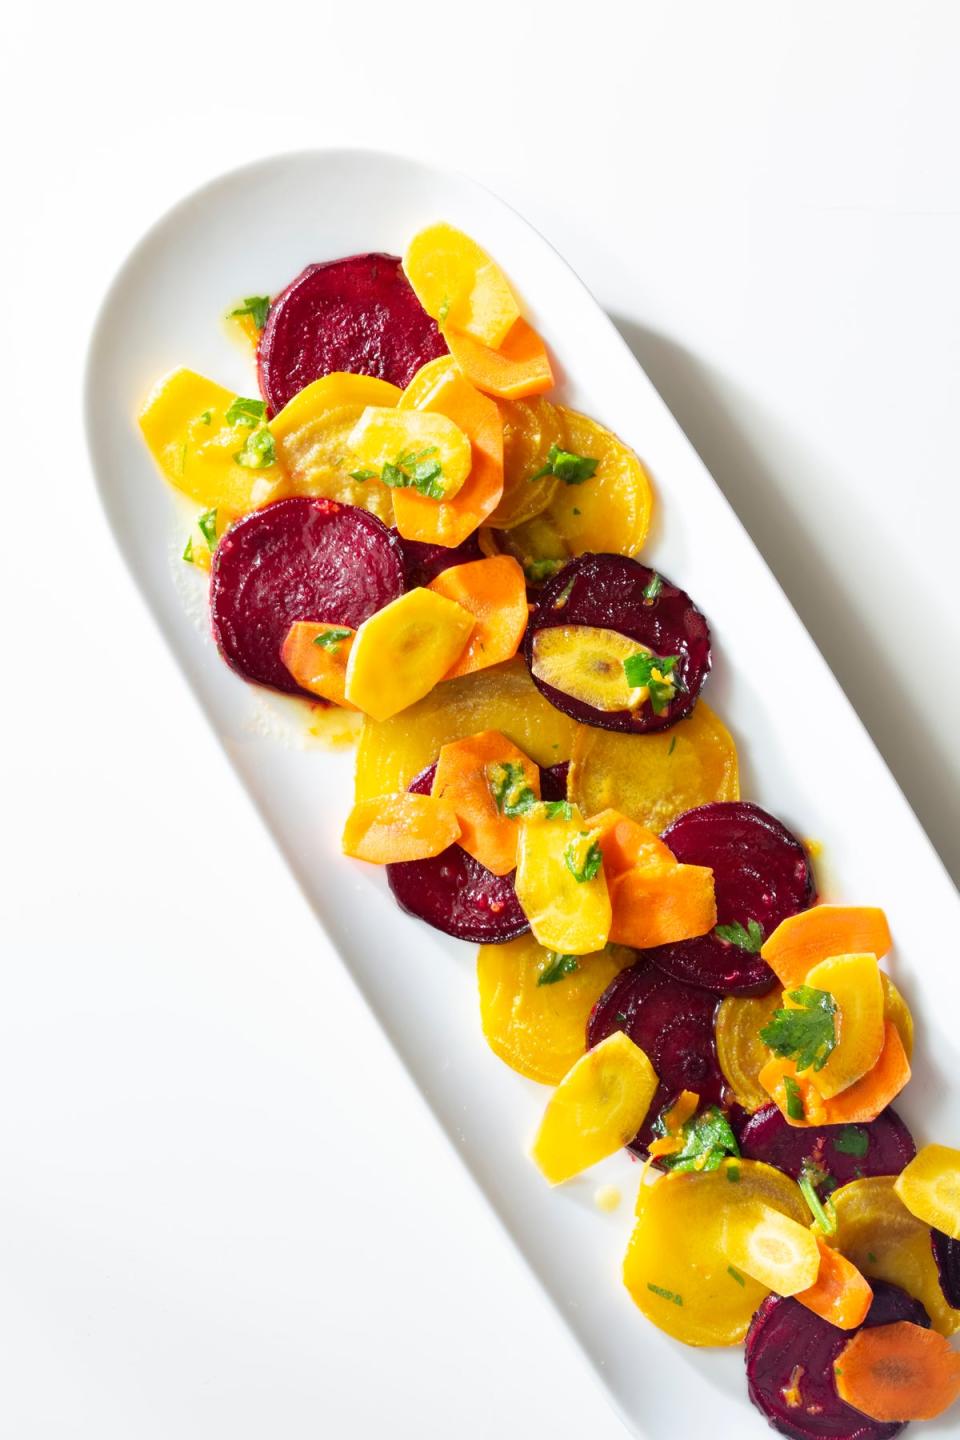 A beetroot salad can be spectacular (Getty/iStock)